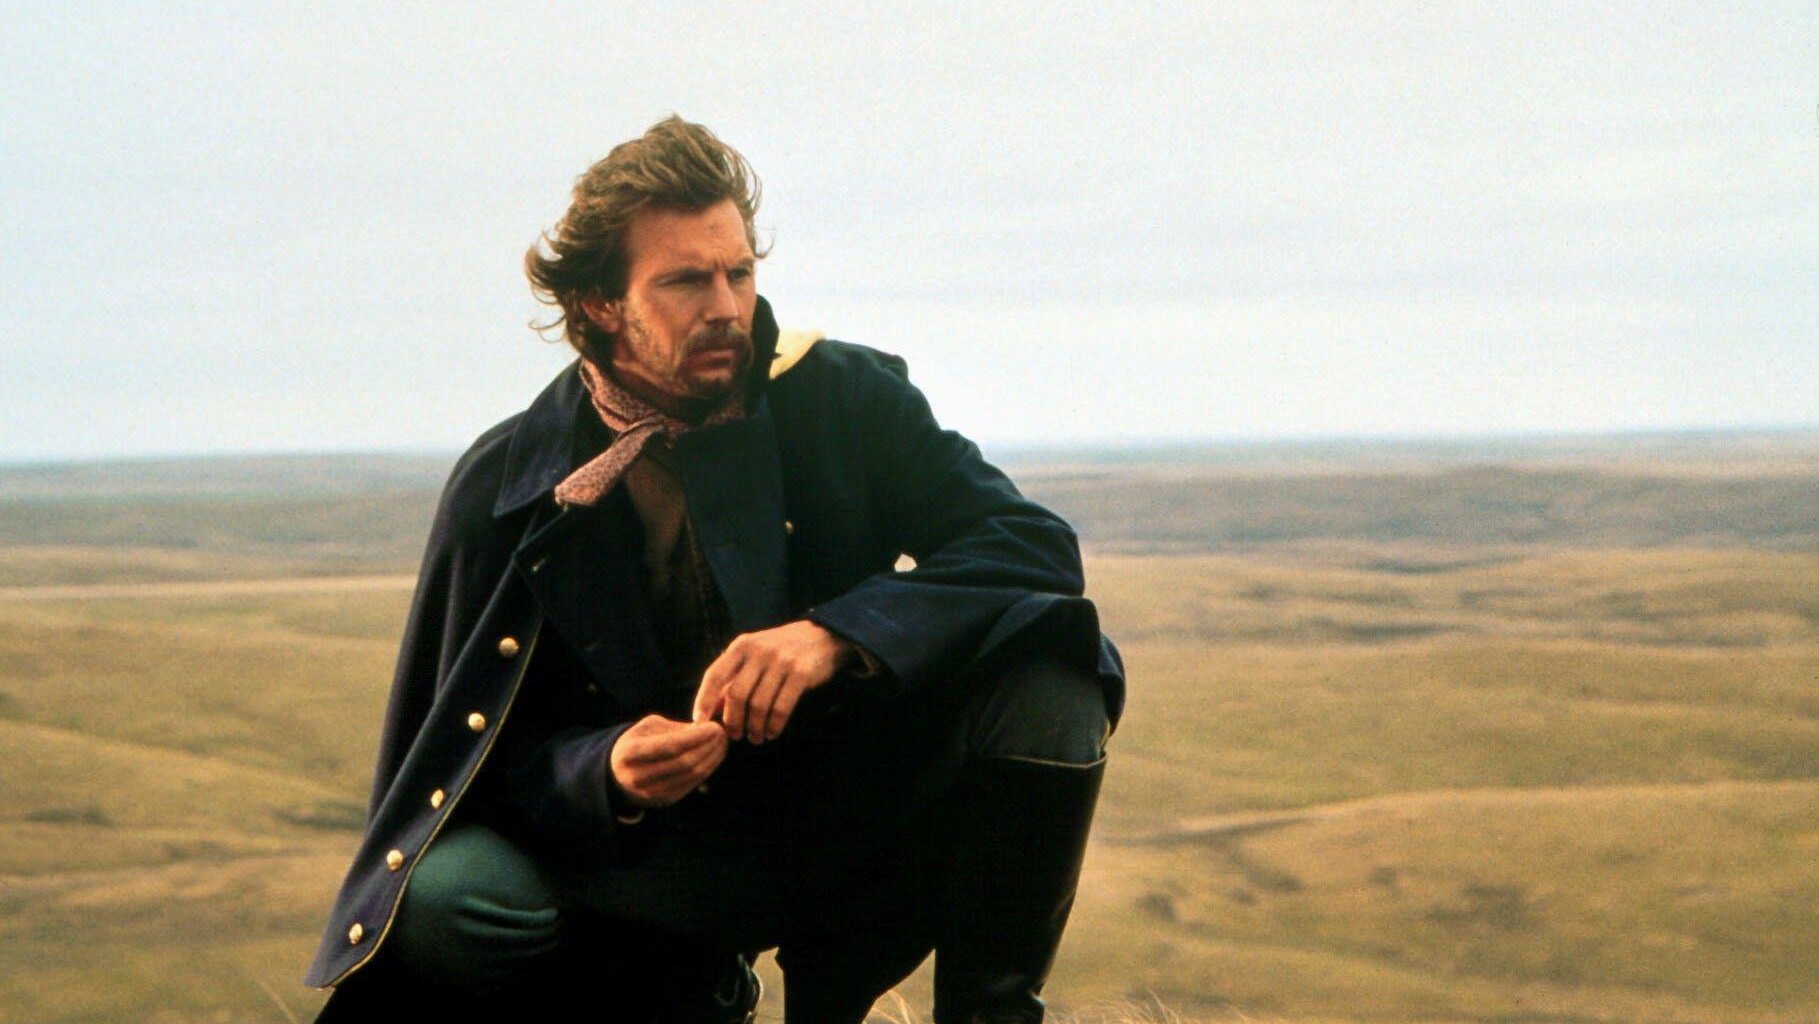 Kevin Costner in Dances With Wolves